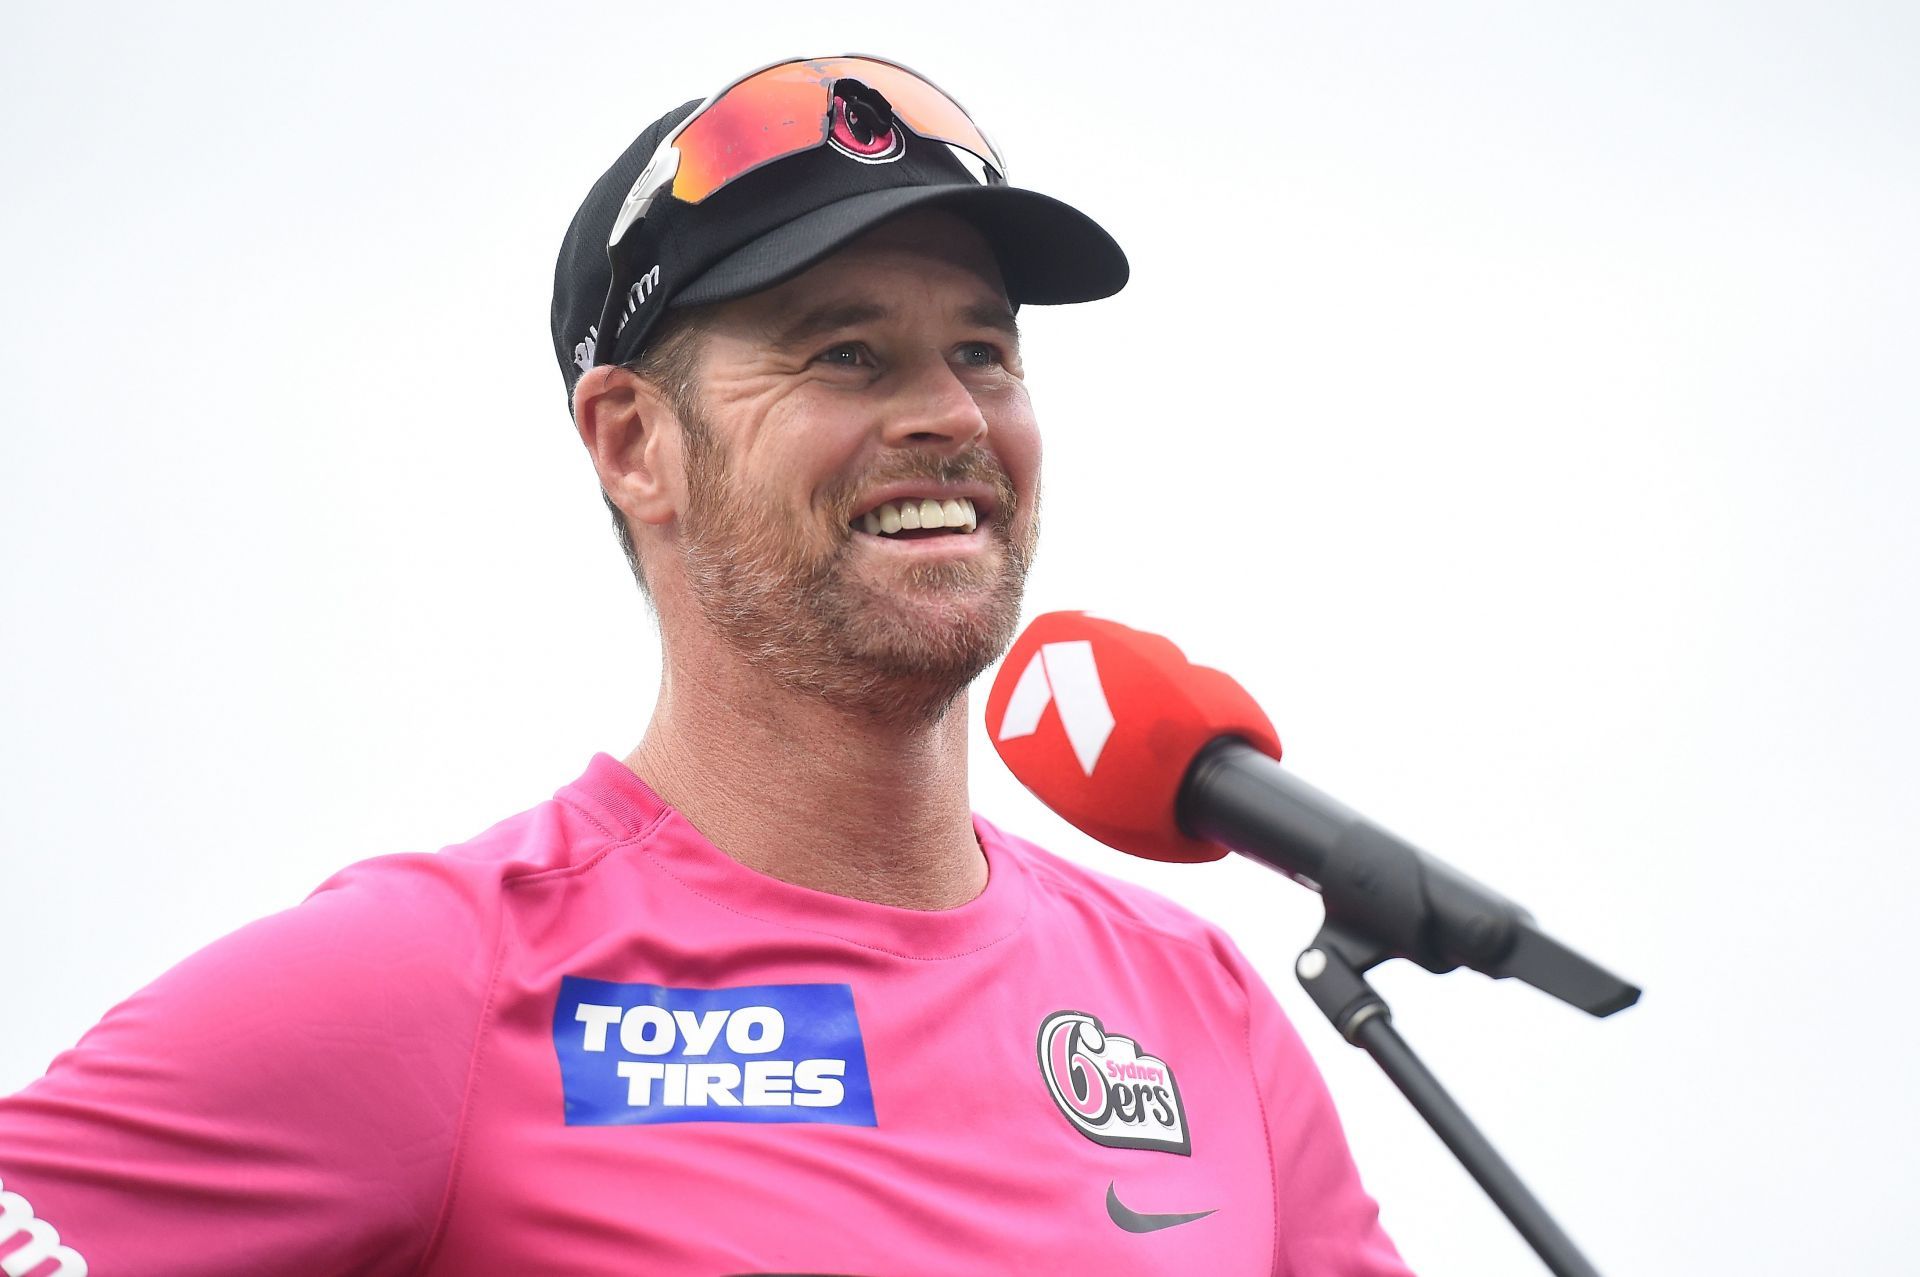 Daniel Christian captained the Sydney Sixers in the Big Bash League (Image: Getty)